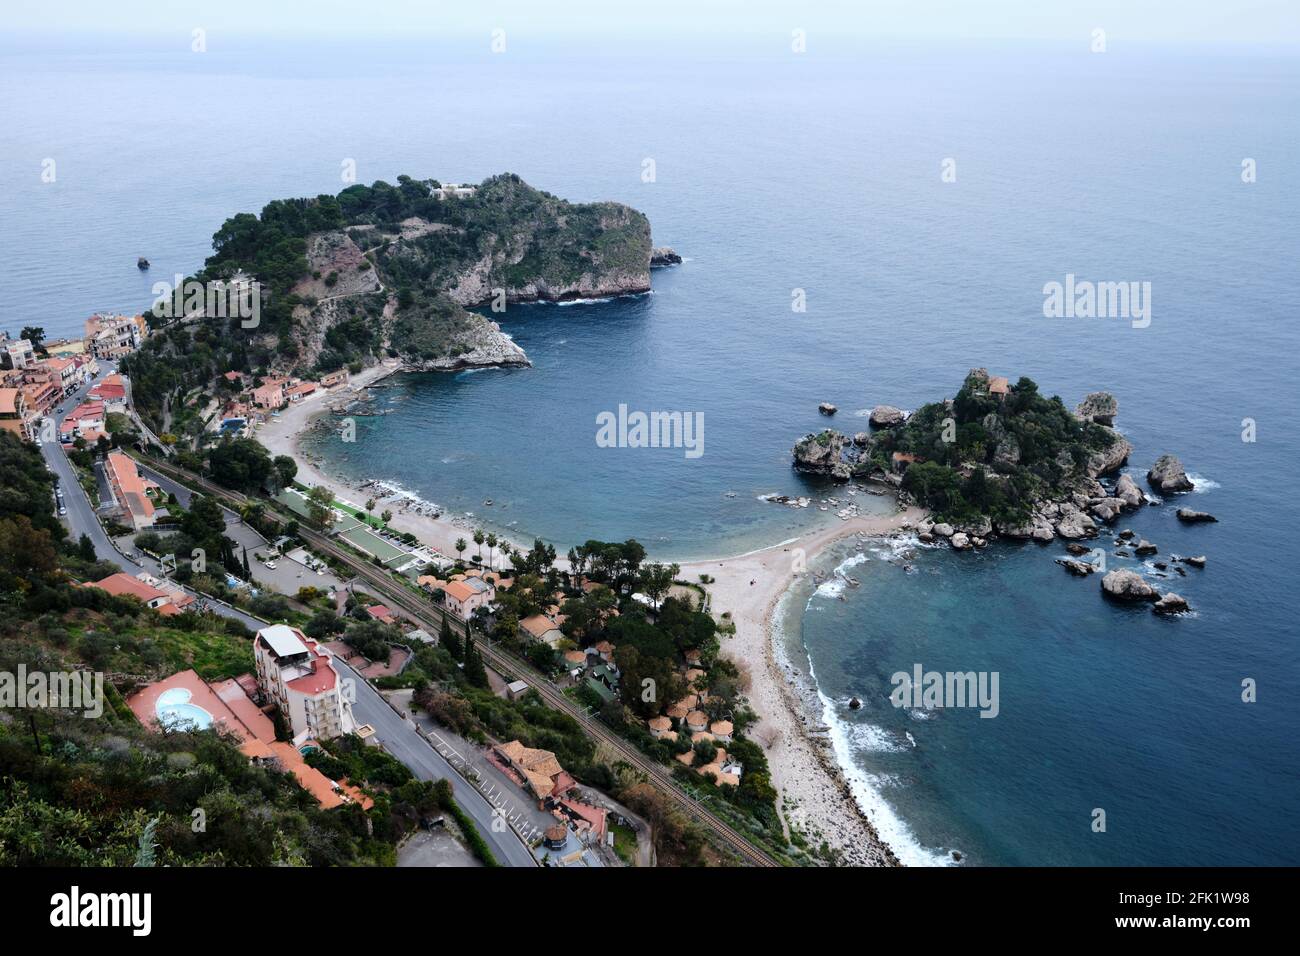 Isola Bella island and the Grotta Azzurra peninsula near Taormina in Sicily, Italy. Known as the The Pearl of the Ionian Sea. Stock Photo